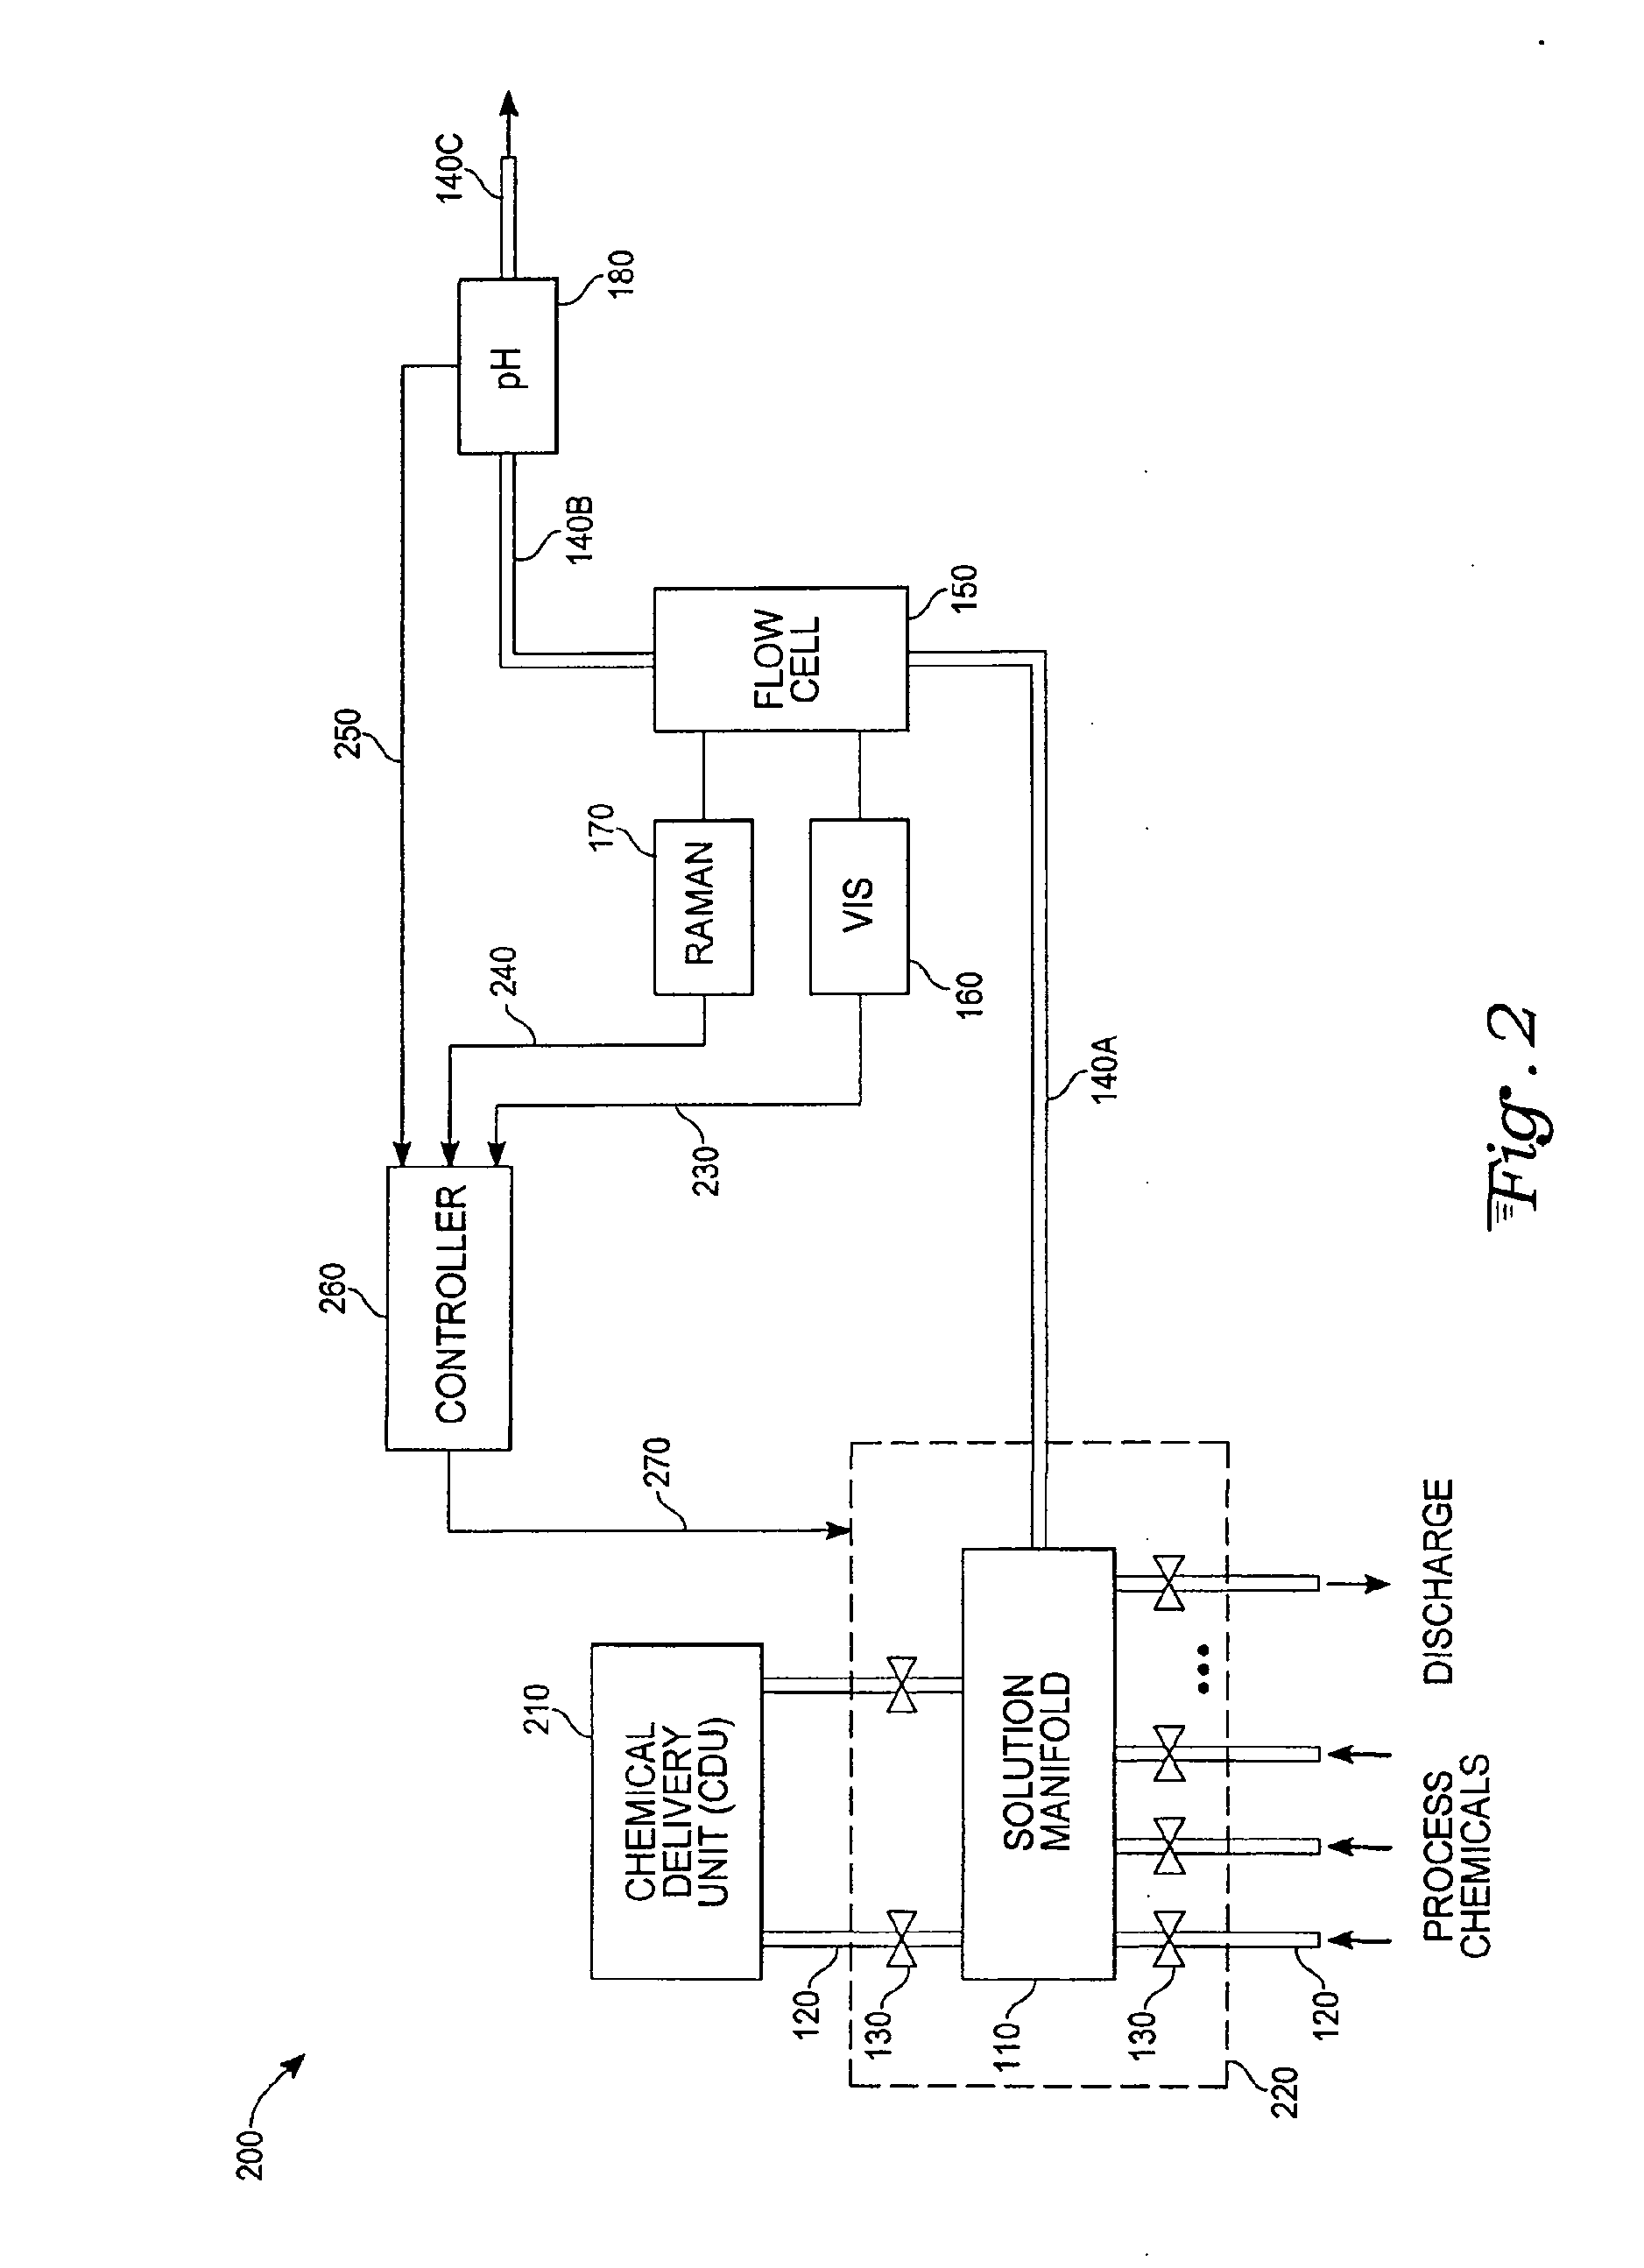 Method and apparatus for plating solution analysis and control